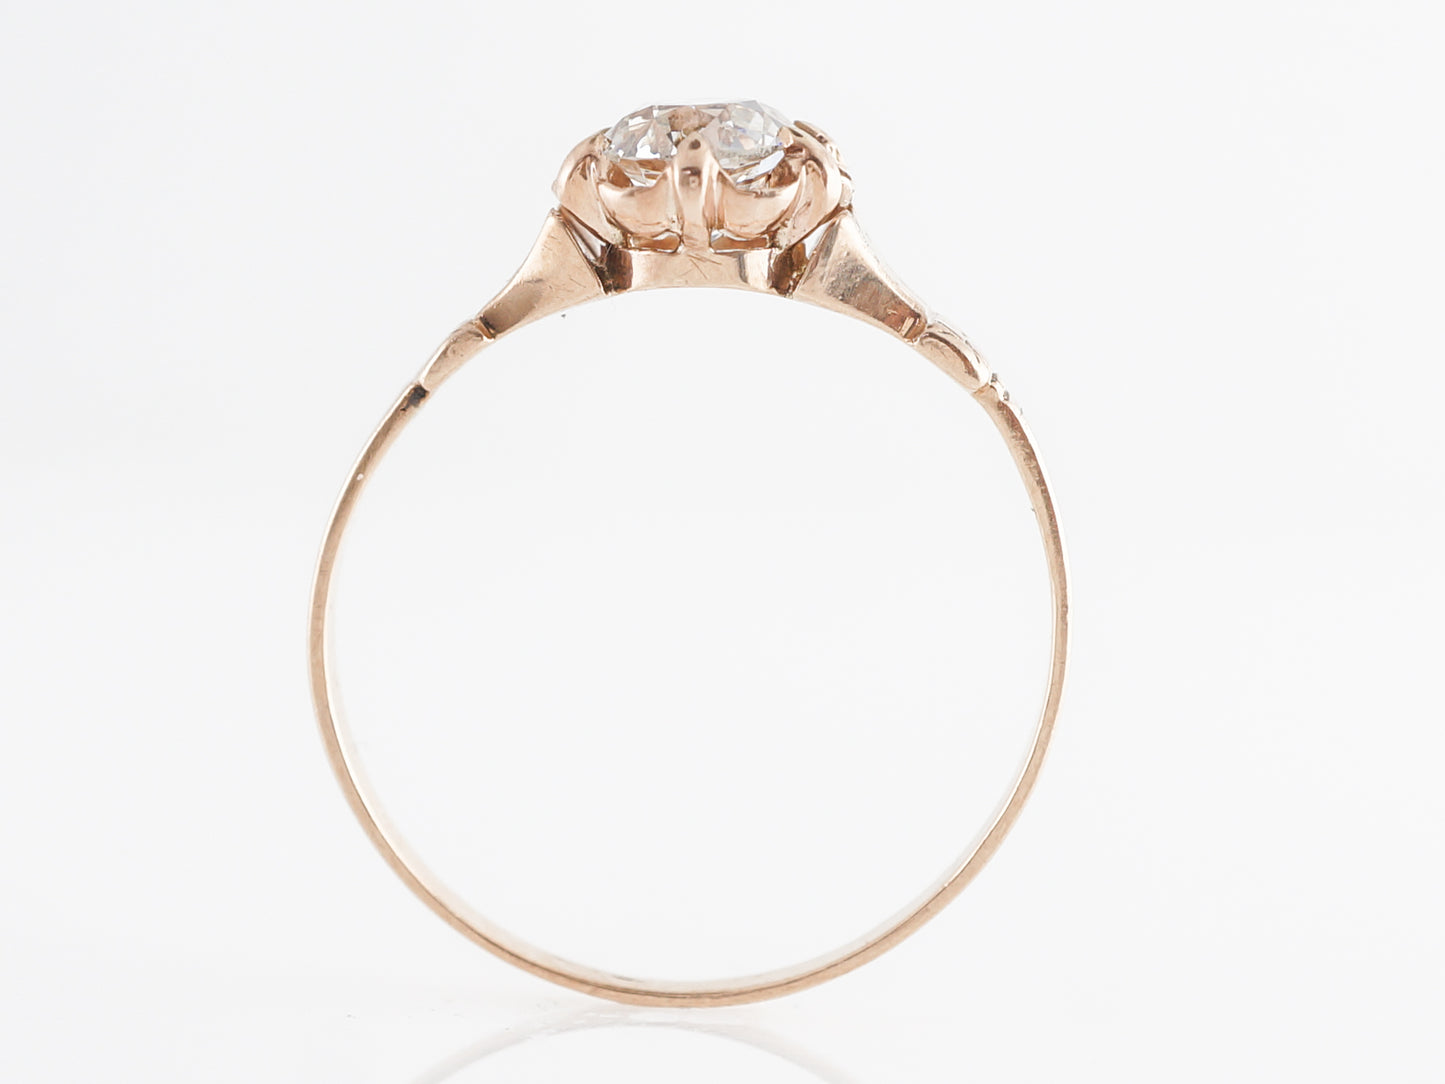 Victorian European Cut Engagement Ring in Rose Gold